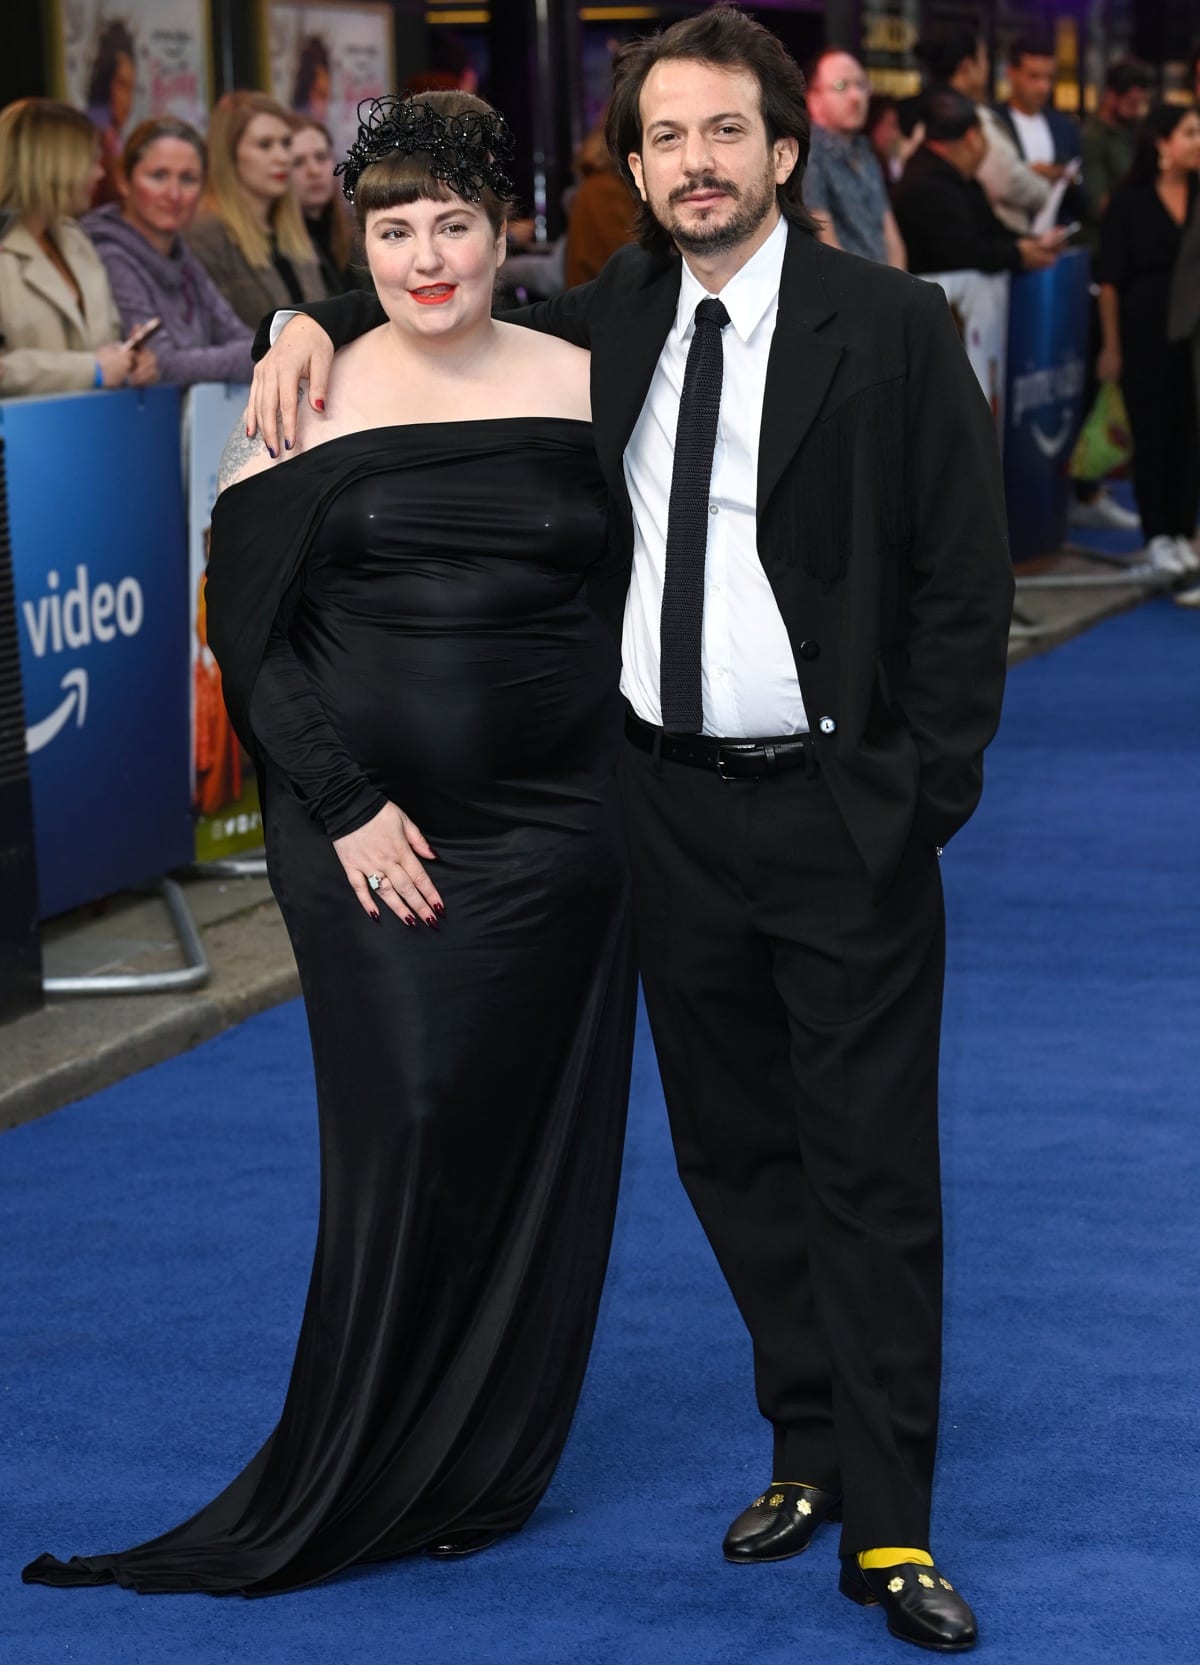 Lena Dunham wearing a custom black strapless gown by Factory New York and Luis Felber in a black suit with a crisp white shirt and a textured necktie at the London premiere of Catherine Called Birdy